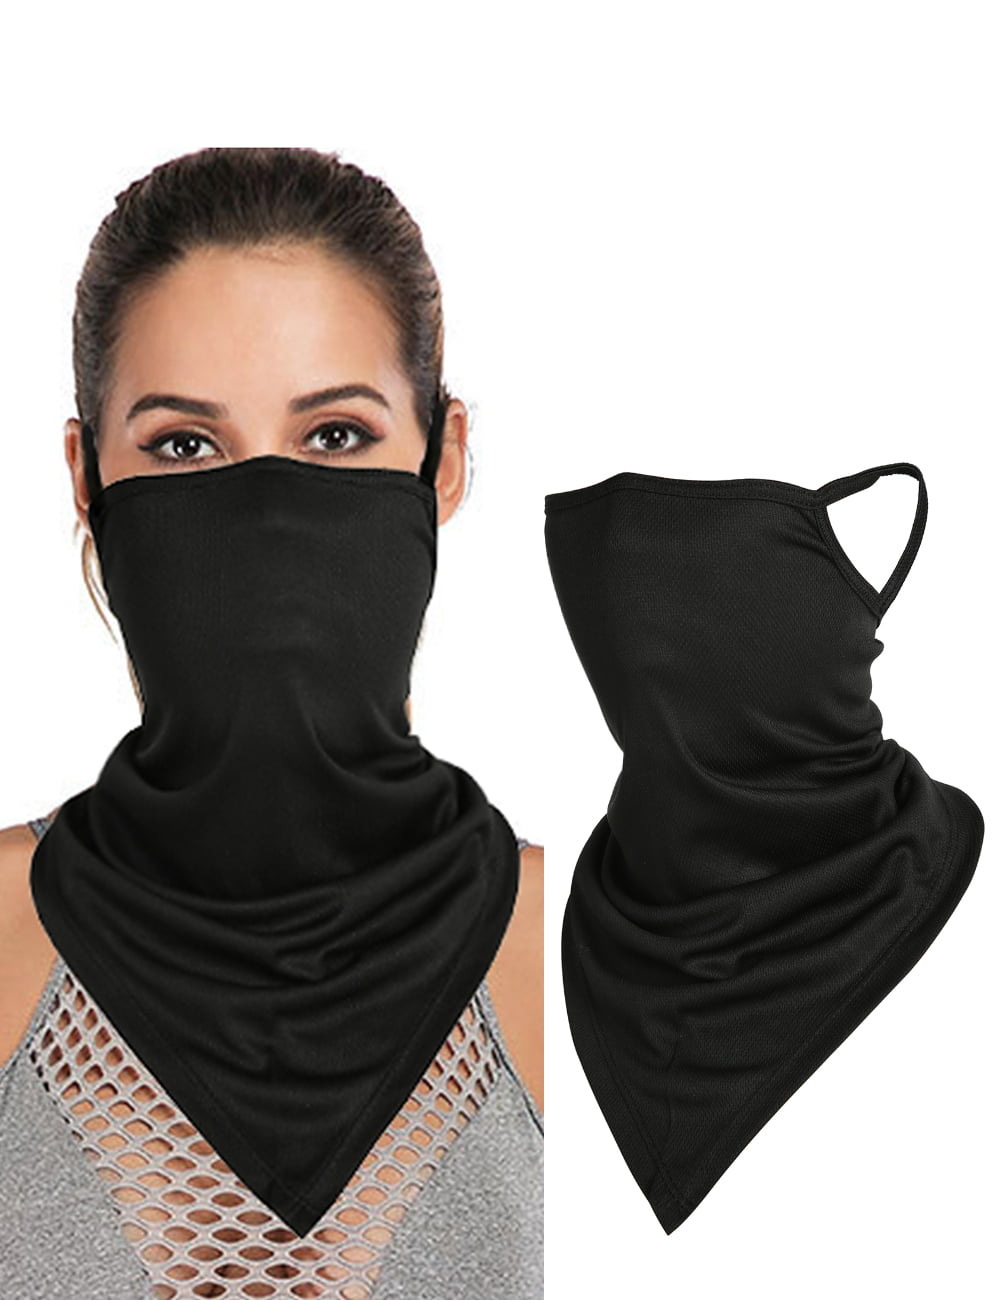 Details about   MultiUse Face Mask Elastic Bandana Fashion Cover Soft Covering Scarf Neck Gaiter 